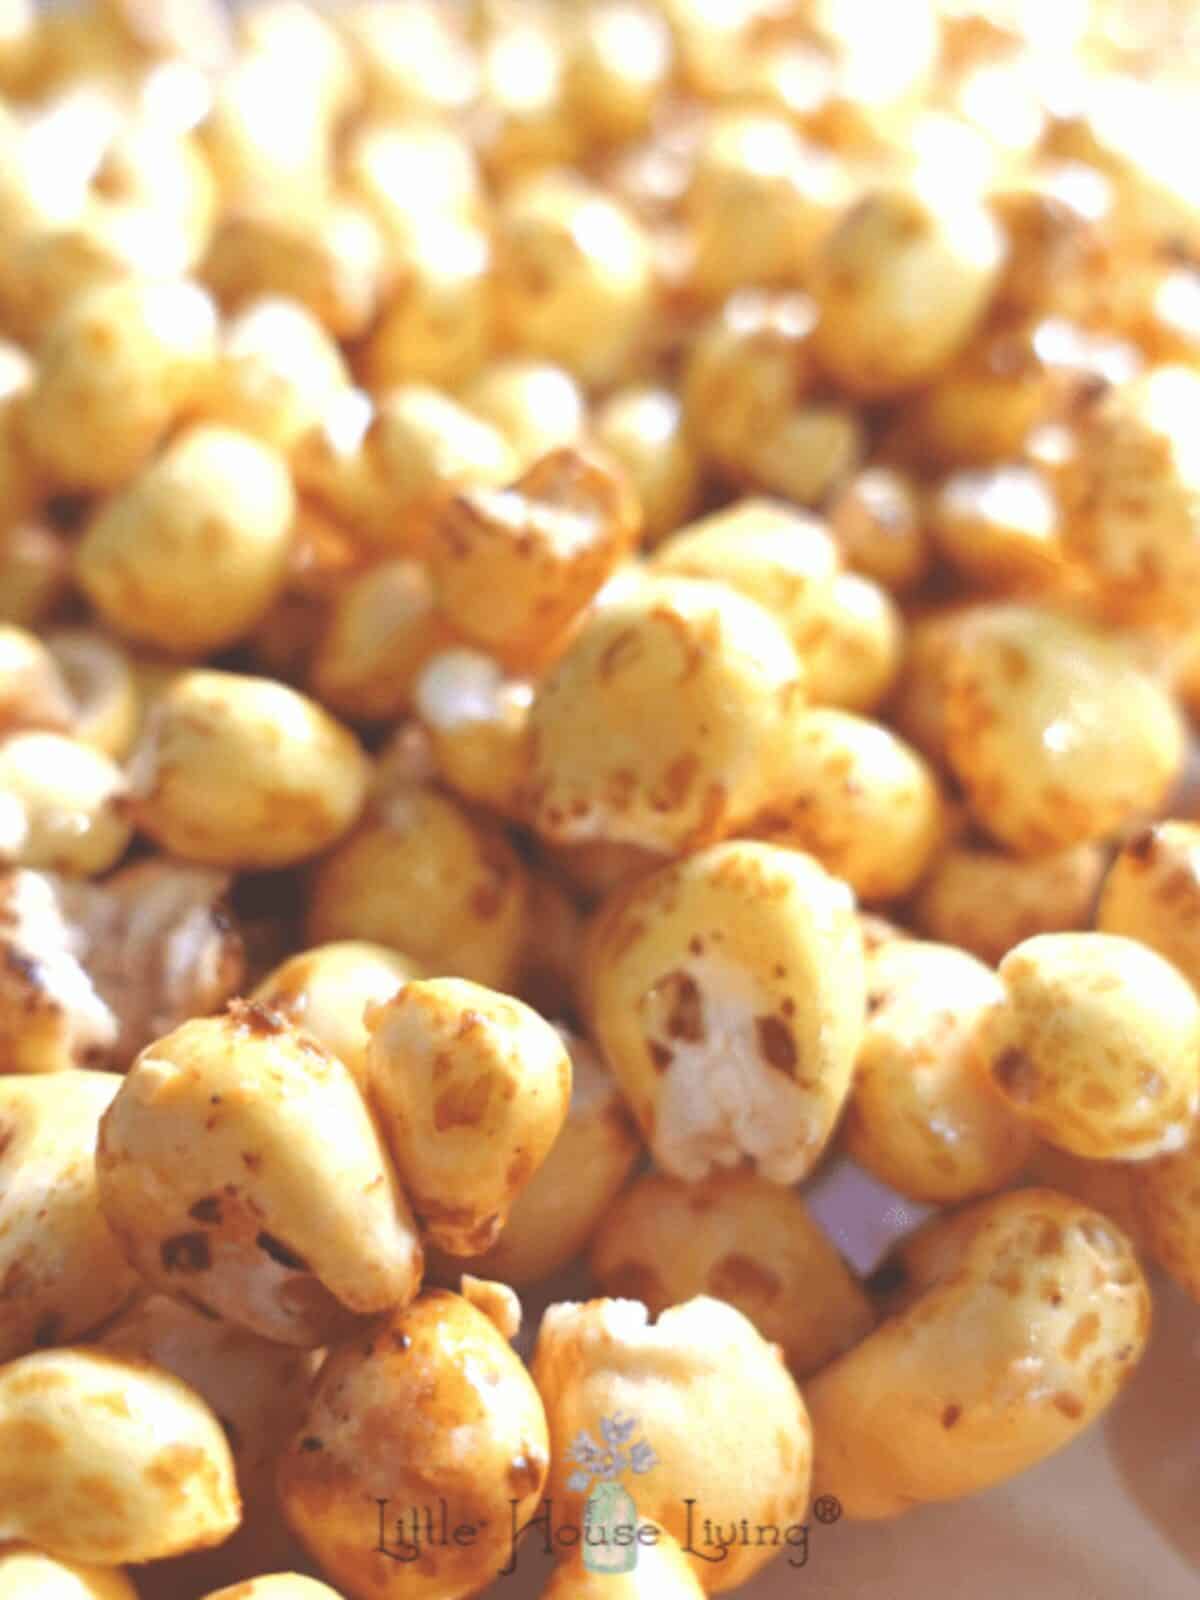 Looking for a simple sweet treat to make for an afternoon snack? This Honey Puffed Corn Recipe only needs 3 ingredients and a little time!